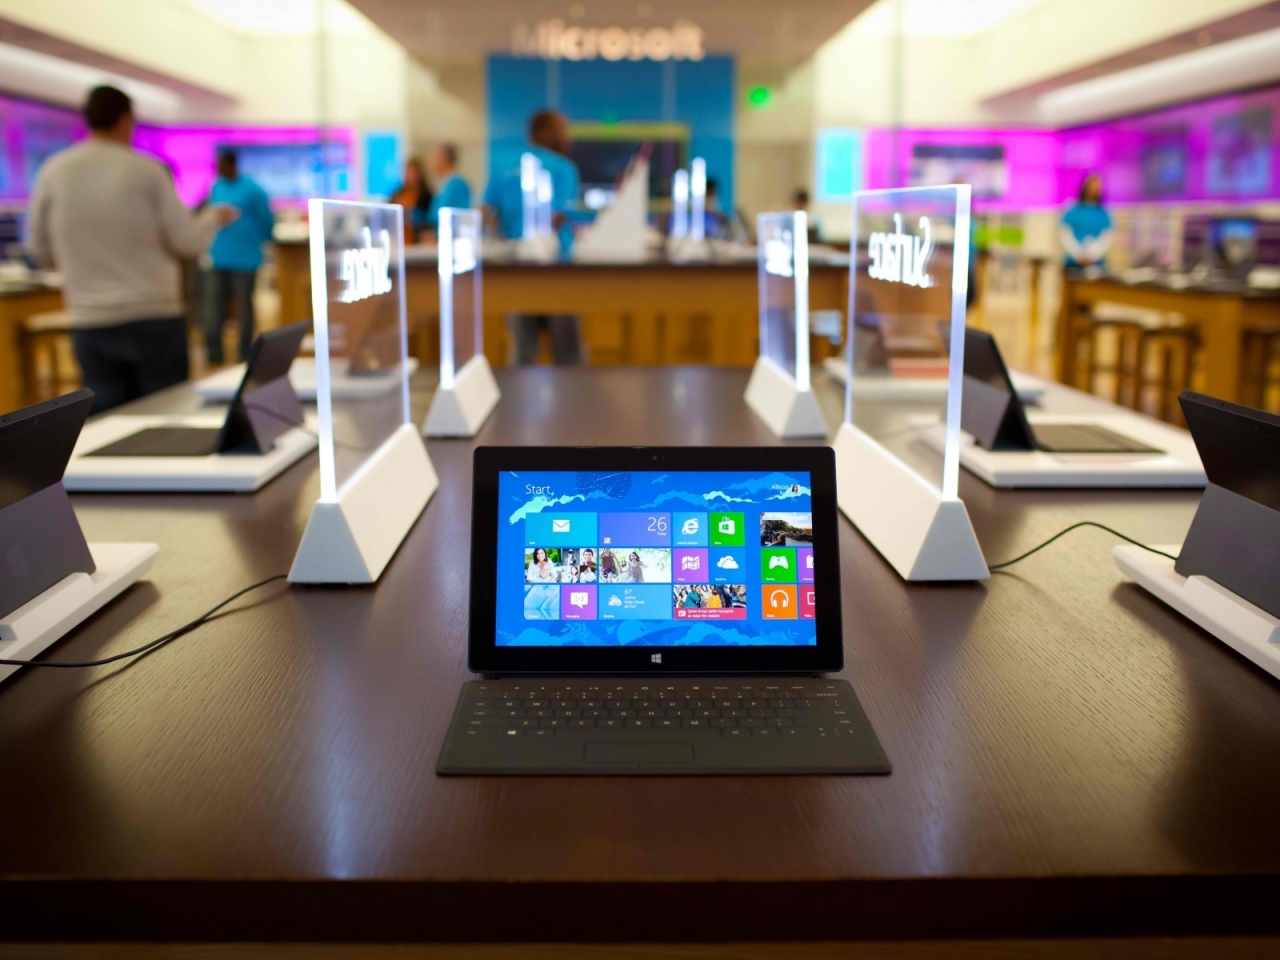 Microsoft Surface Pro Windows 8 Tablet for 1280 x 960 resolution